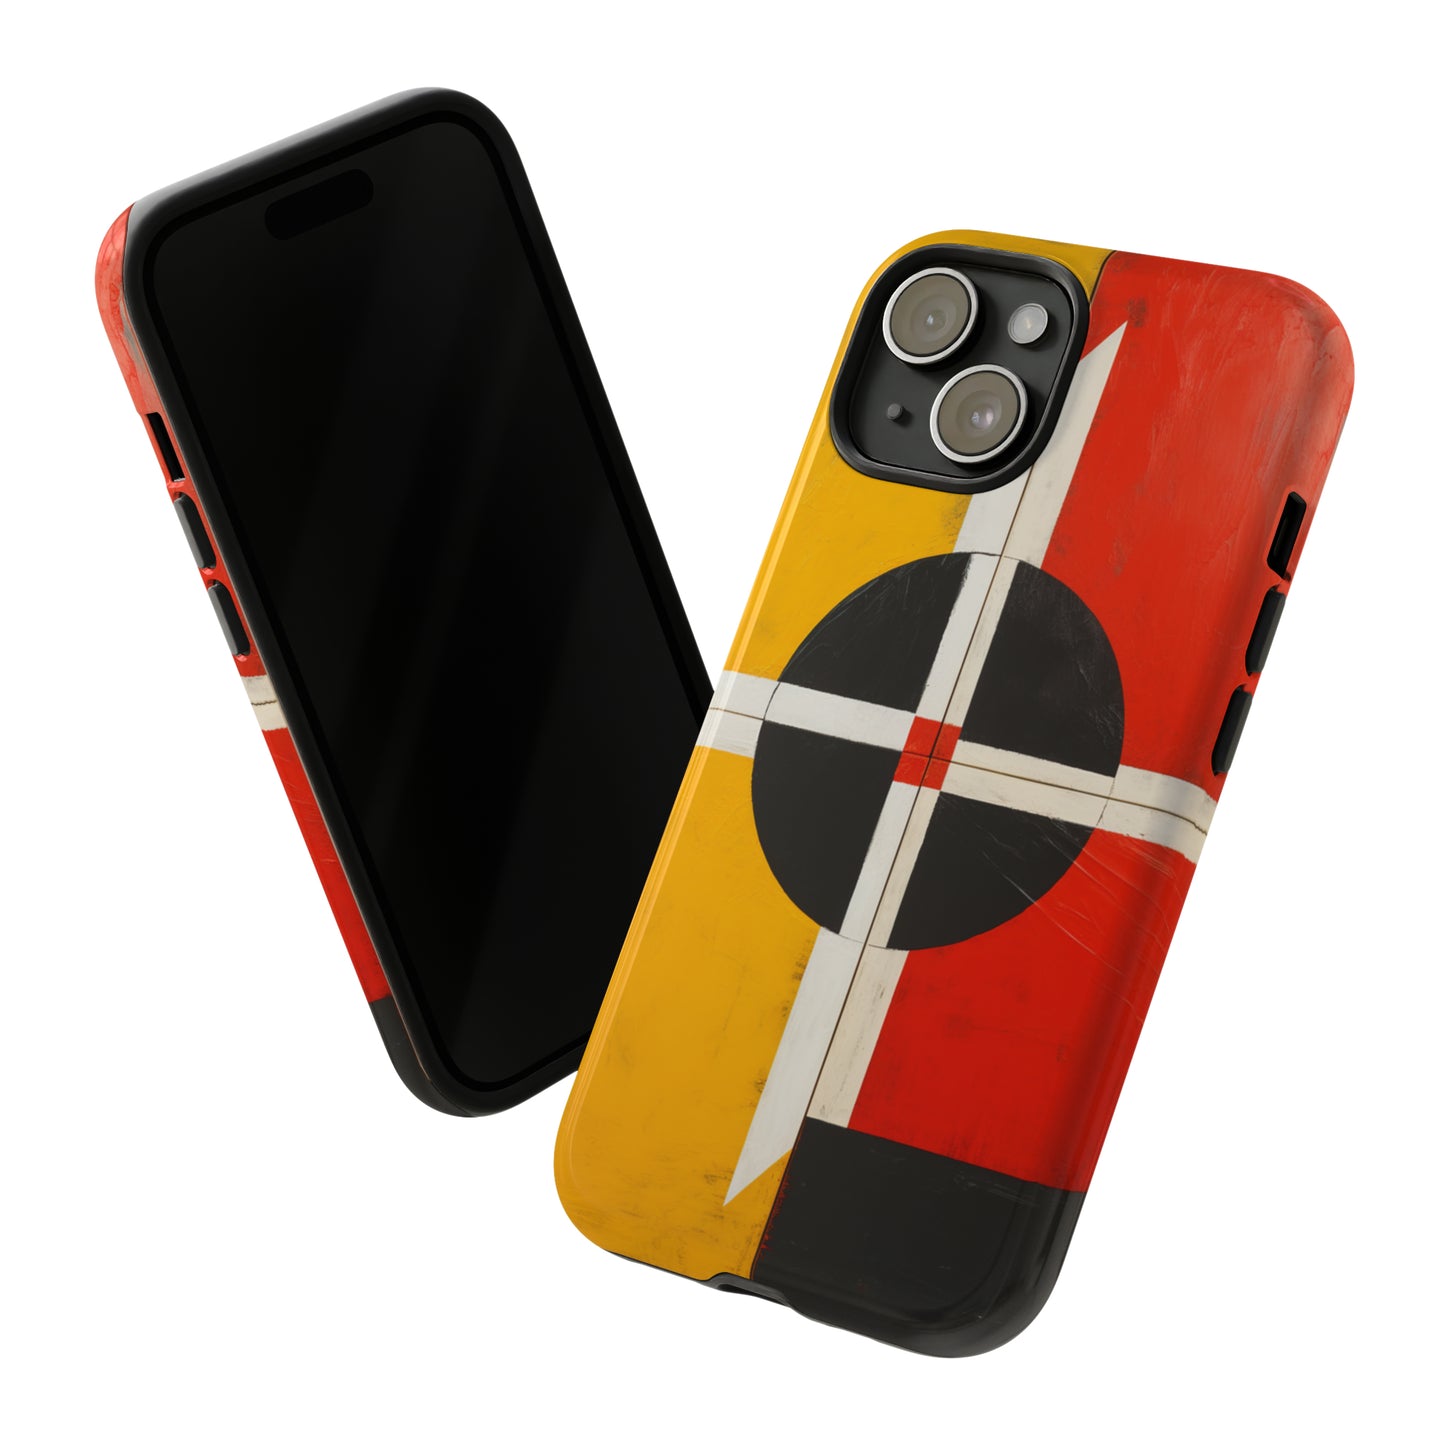 American Indian phone case